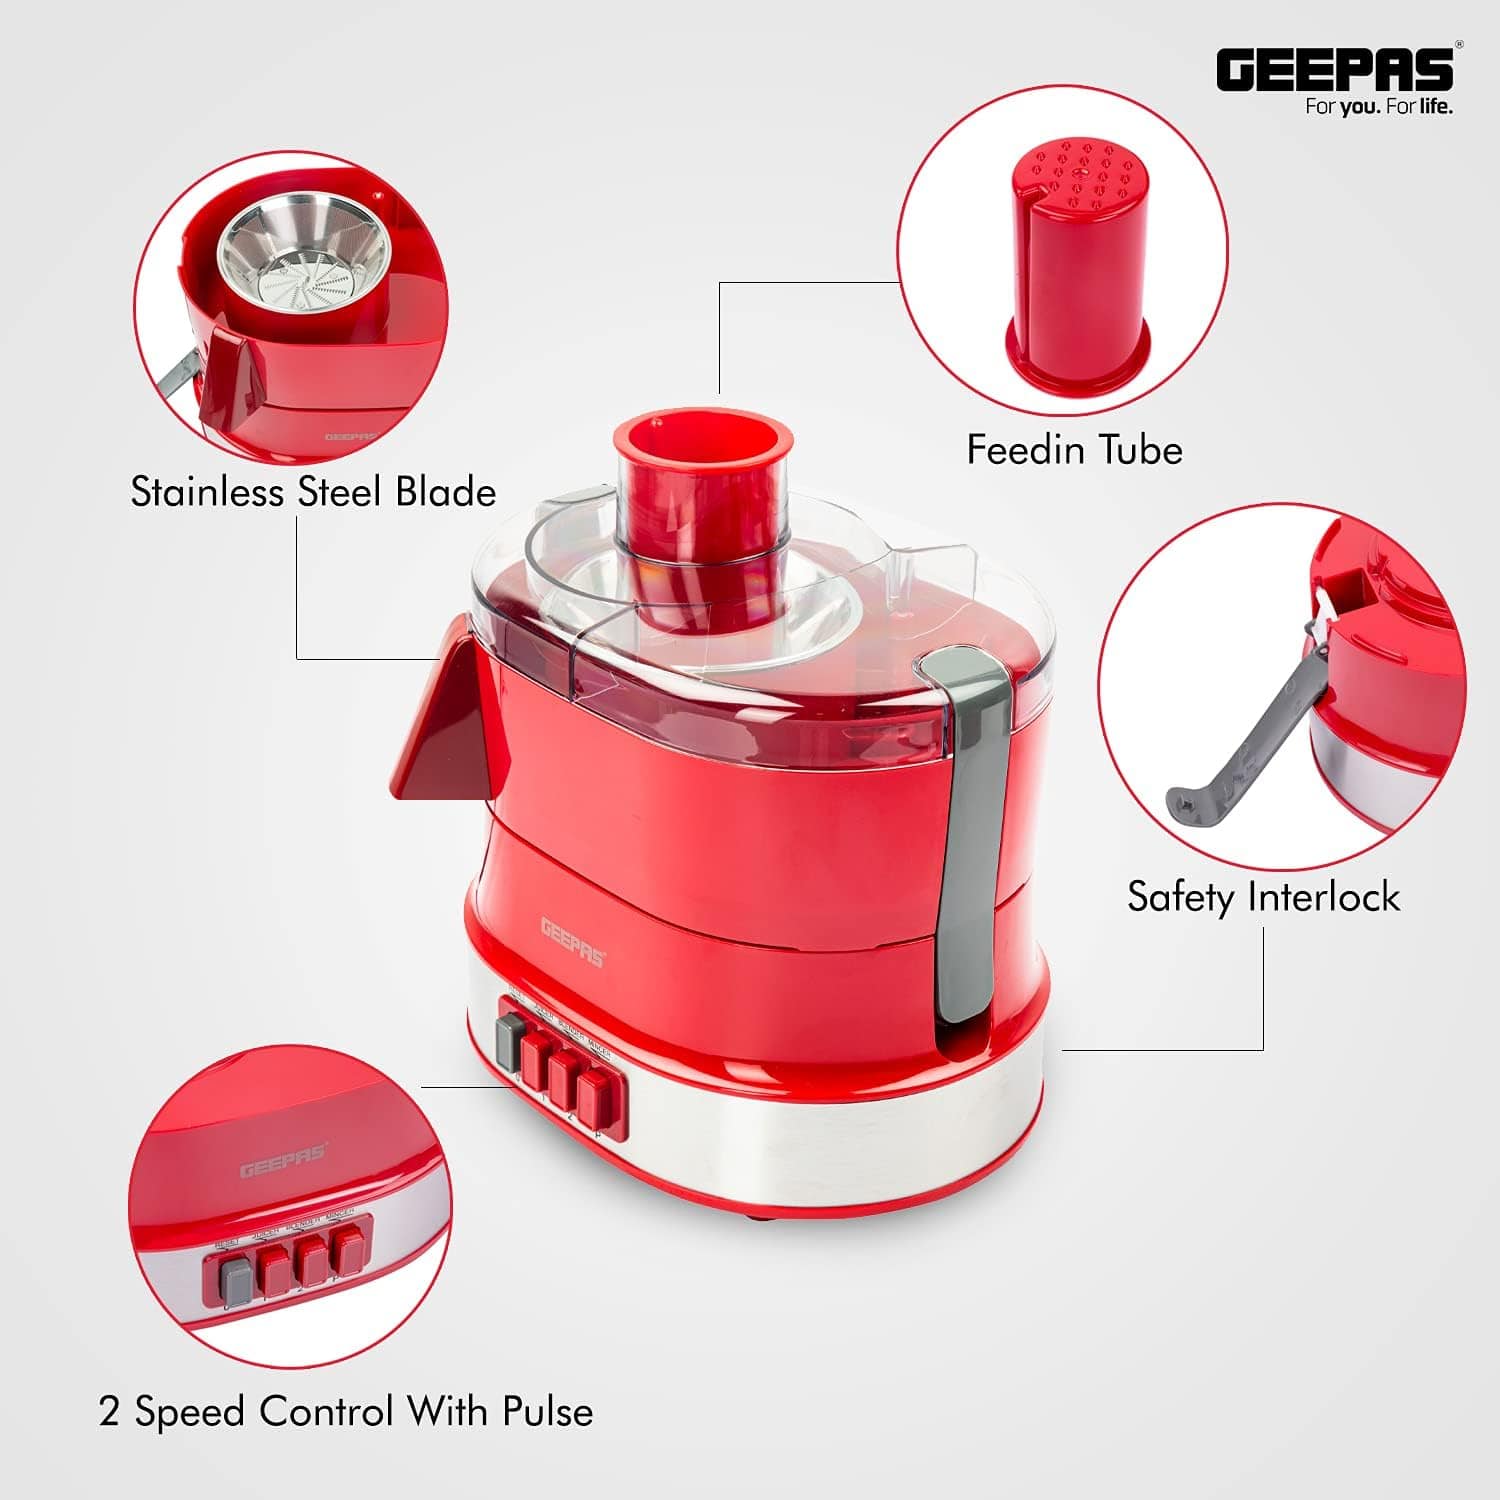 Geepas 4-in-1 Food Processor 600W - GSB9990 | Supply Master Accra, Ghana Electric Blender Buy Tools hardware Building materials